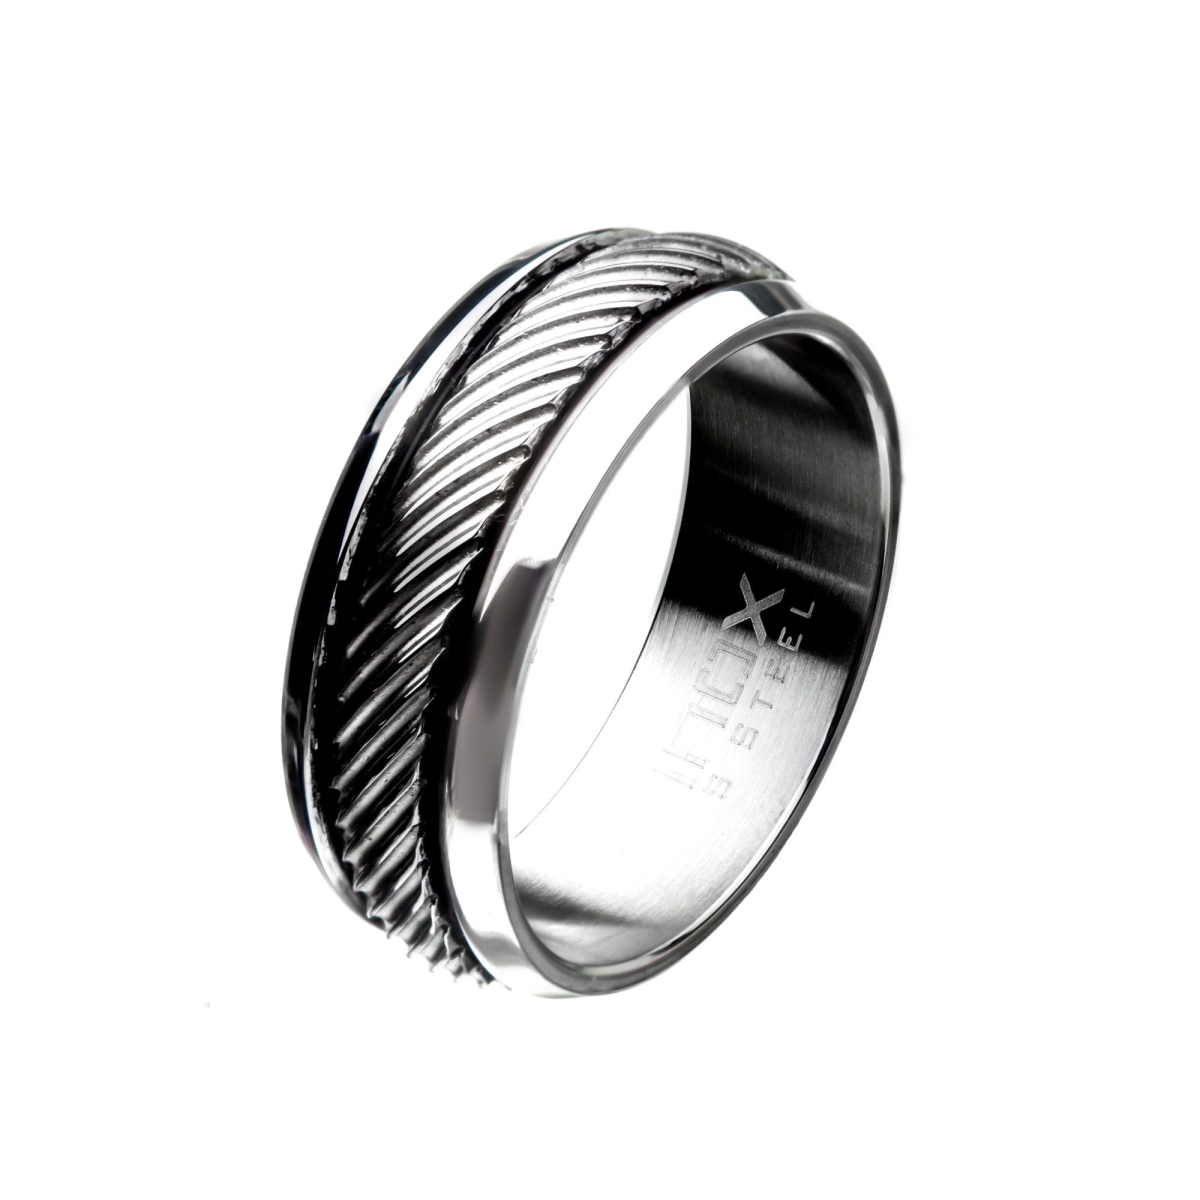 Mens Inlayed Band Ring - Polished Casted Steel - Size 10